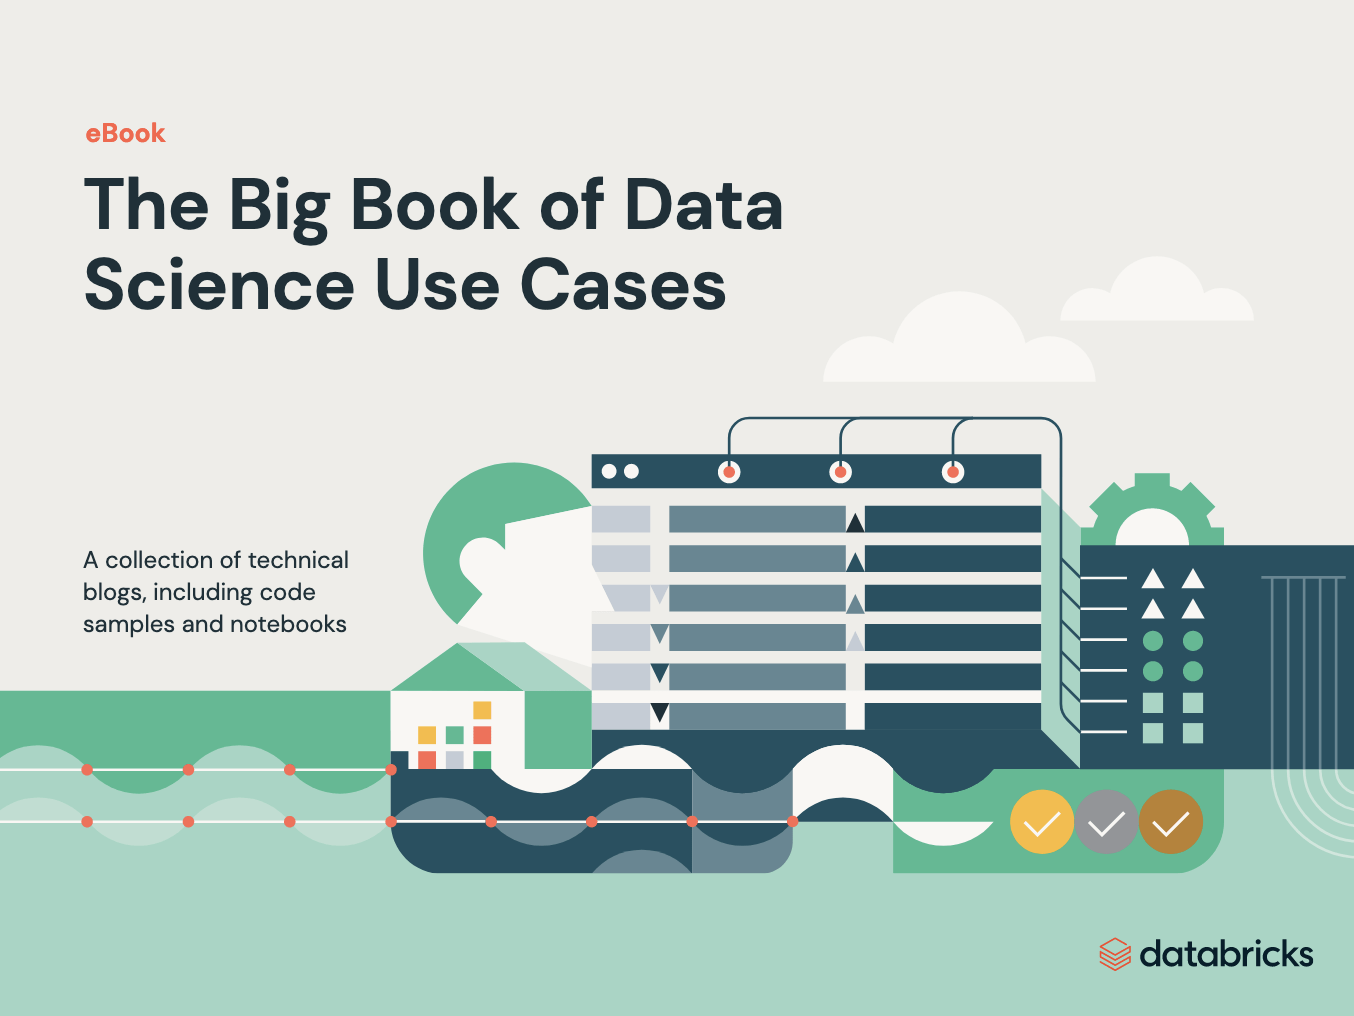 data science use cases 1 - The Big Book of Data Science Use Cases